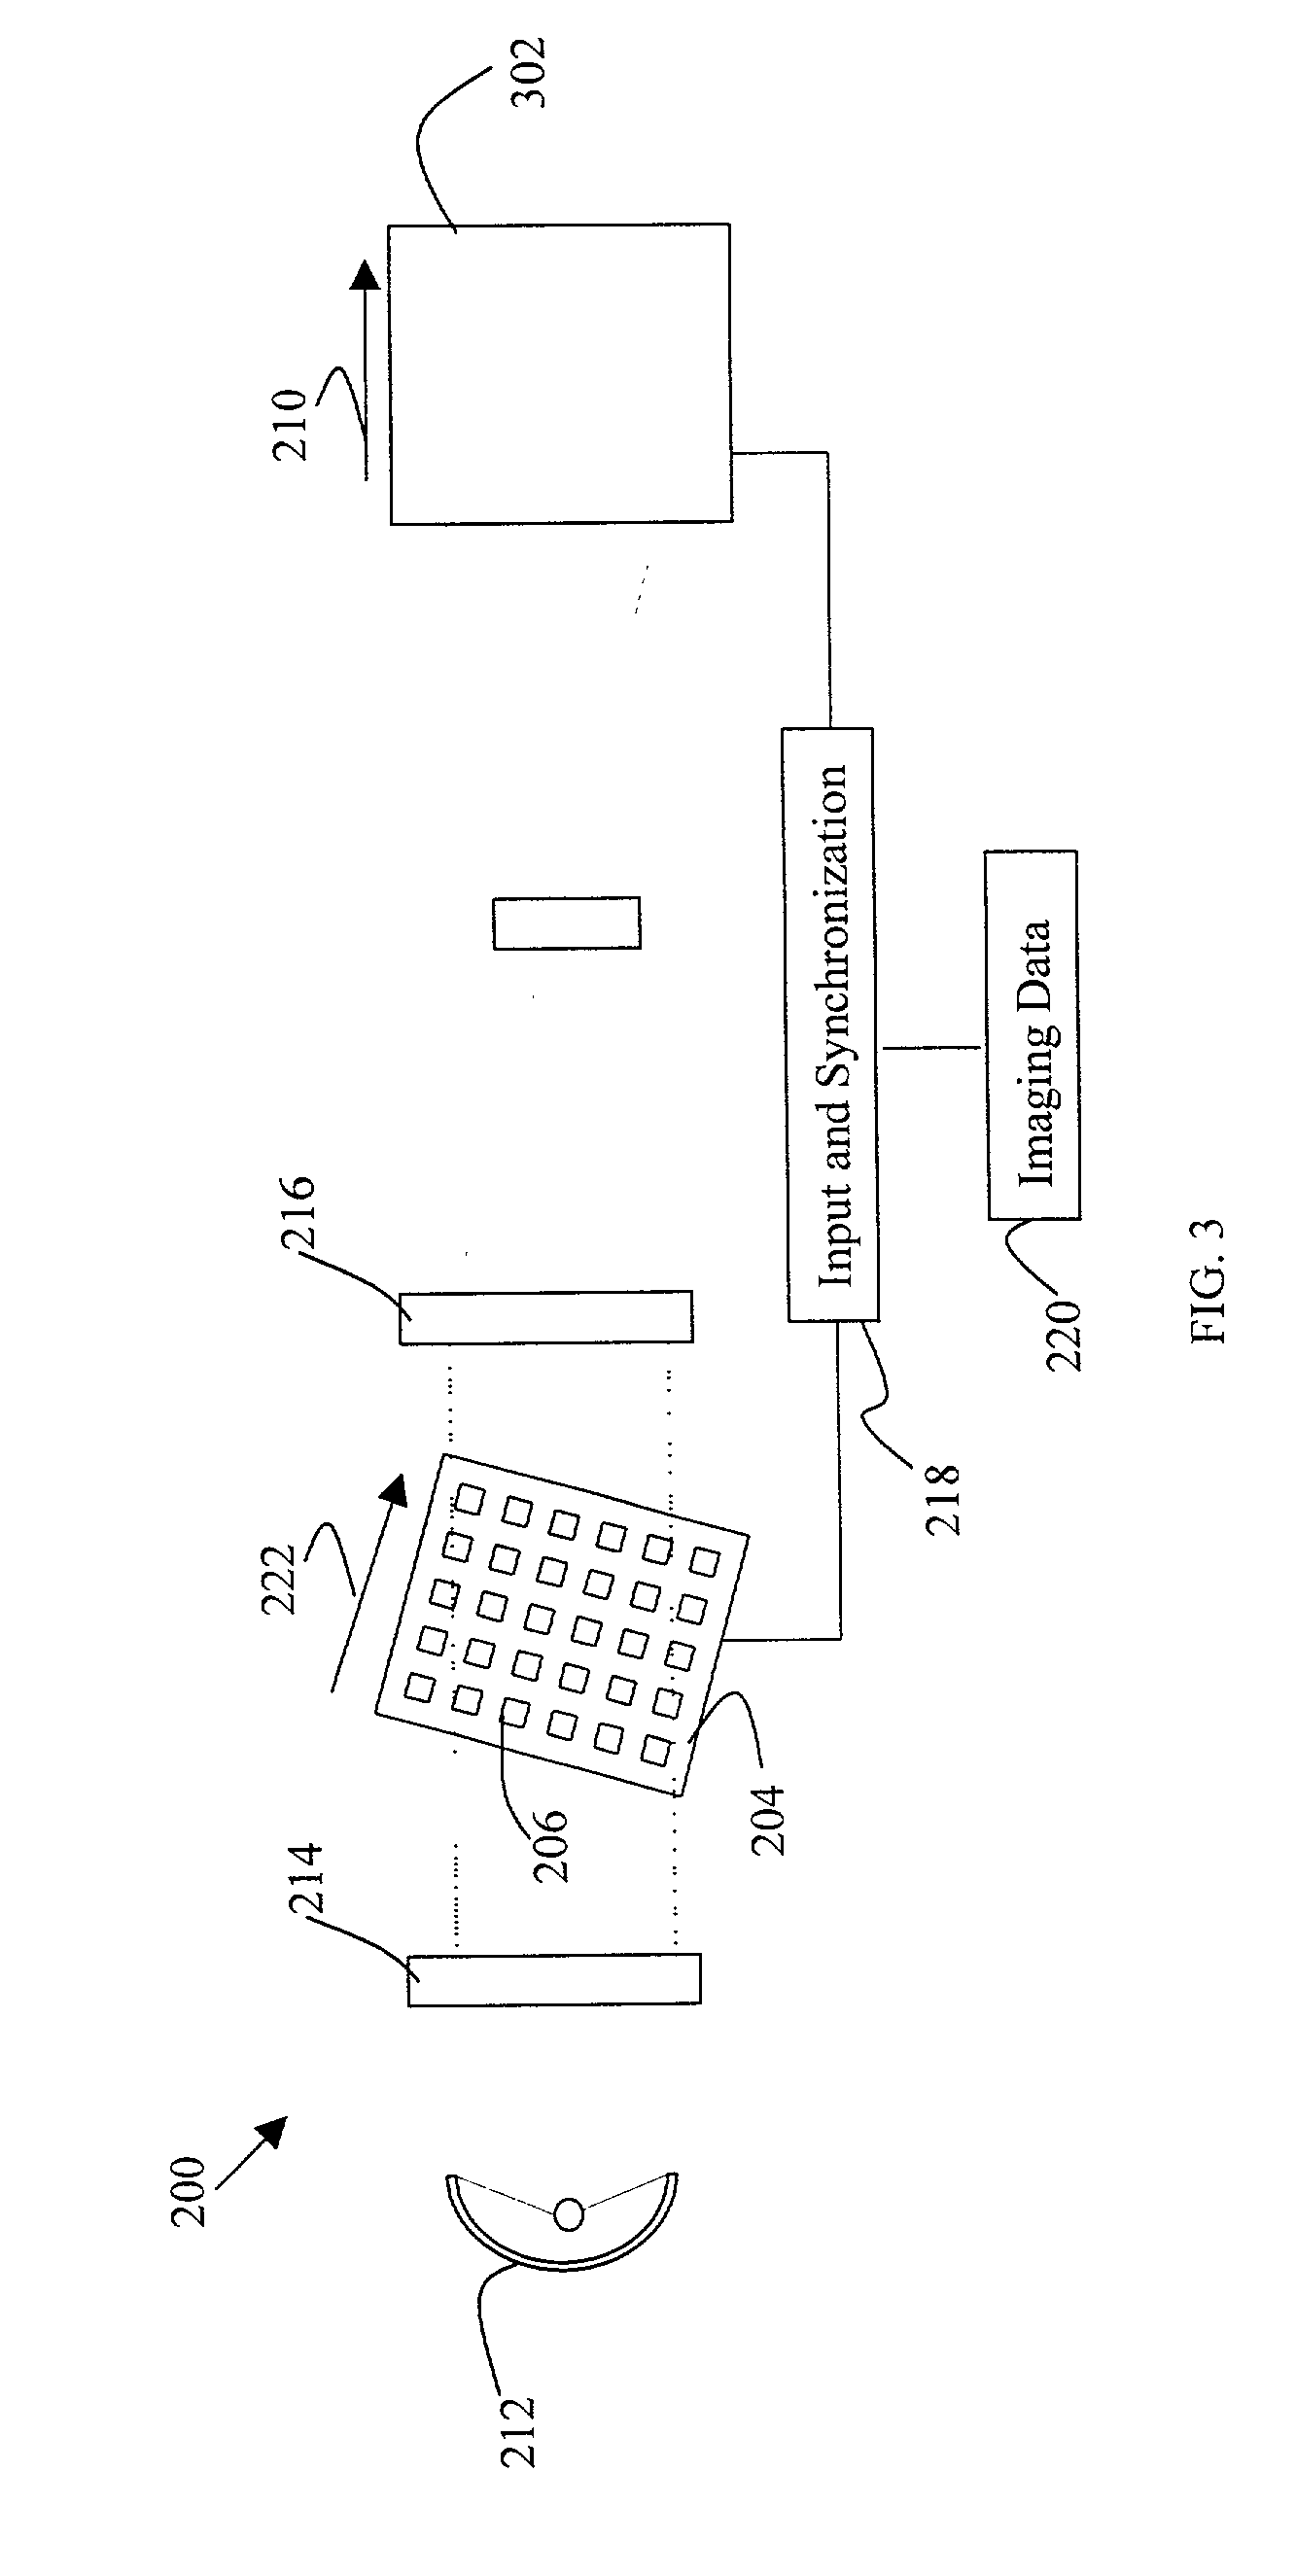 Method and apparatus for high speed digitized exposure